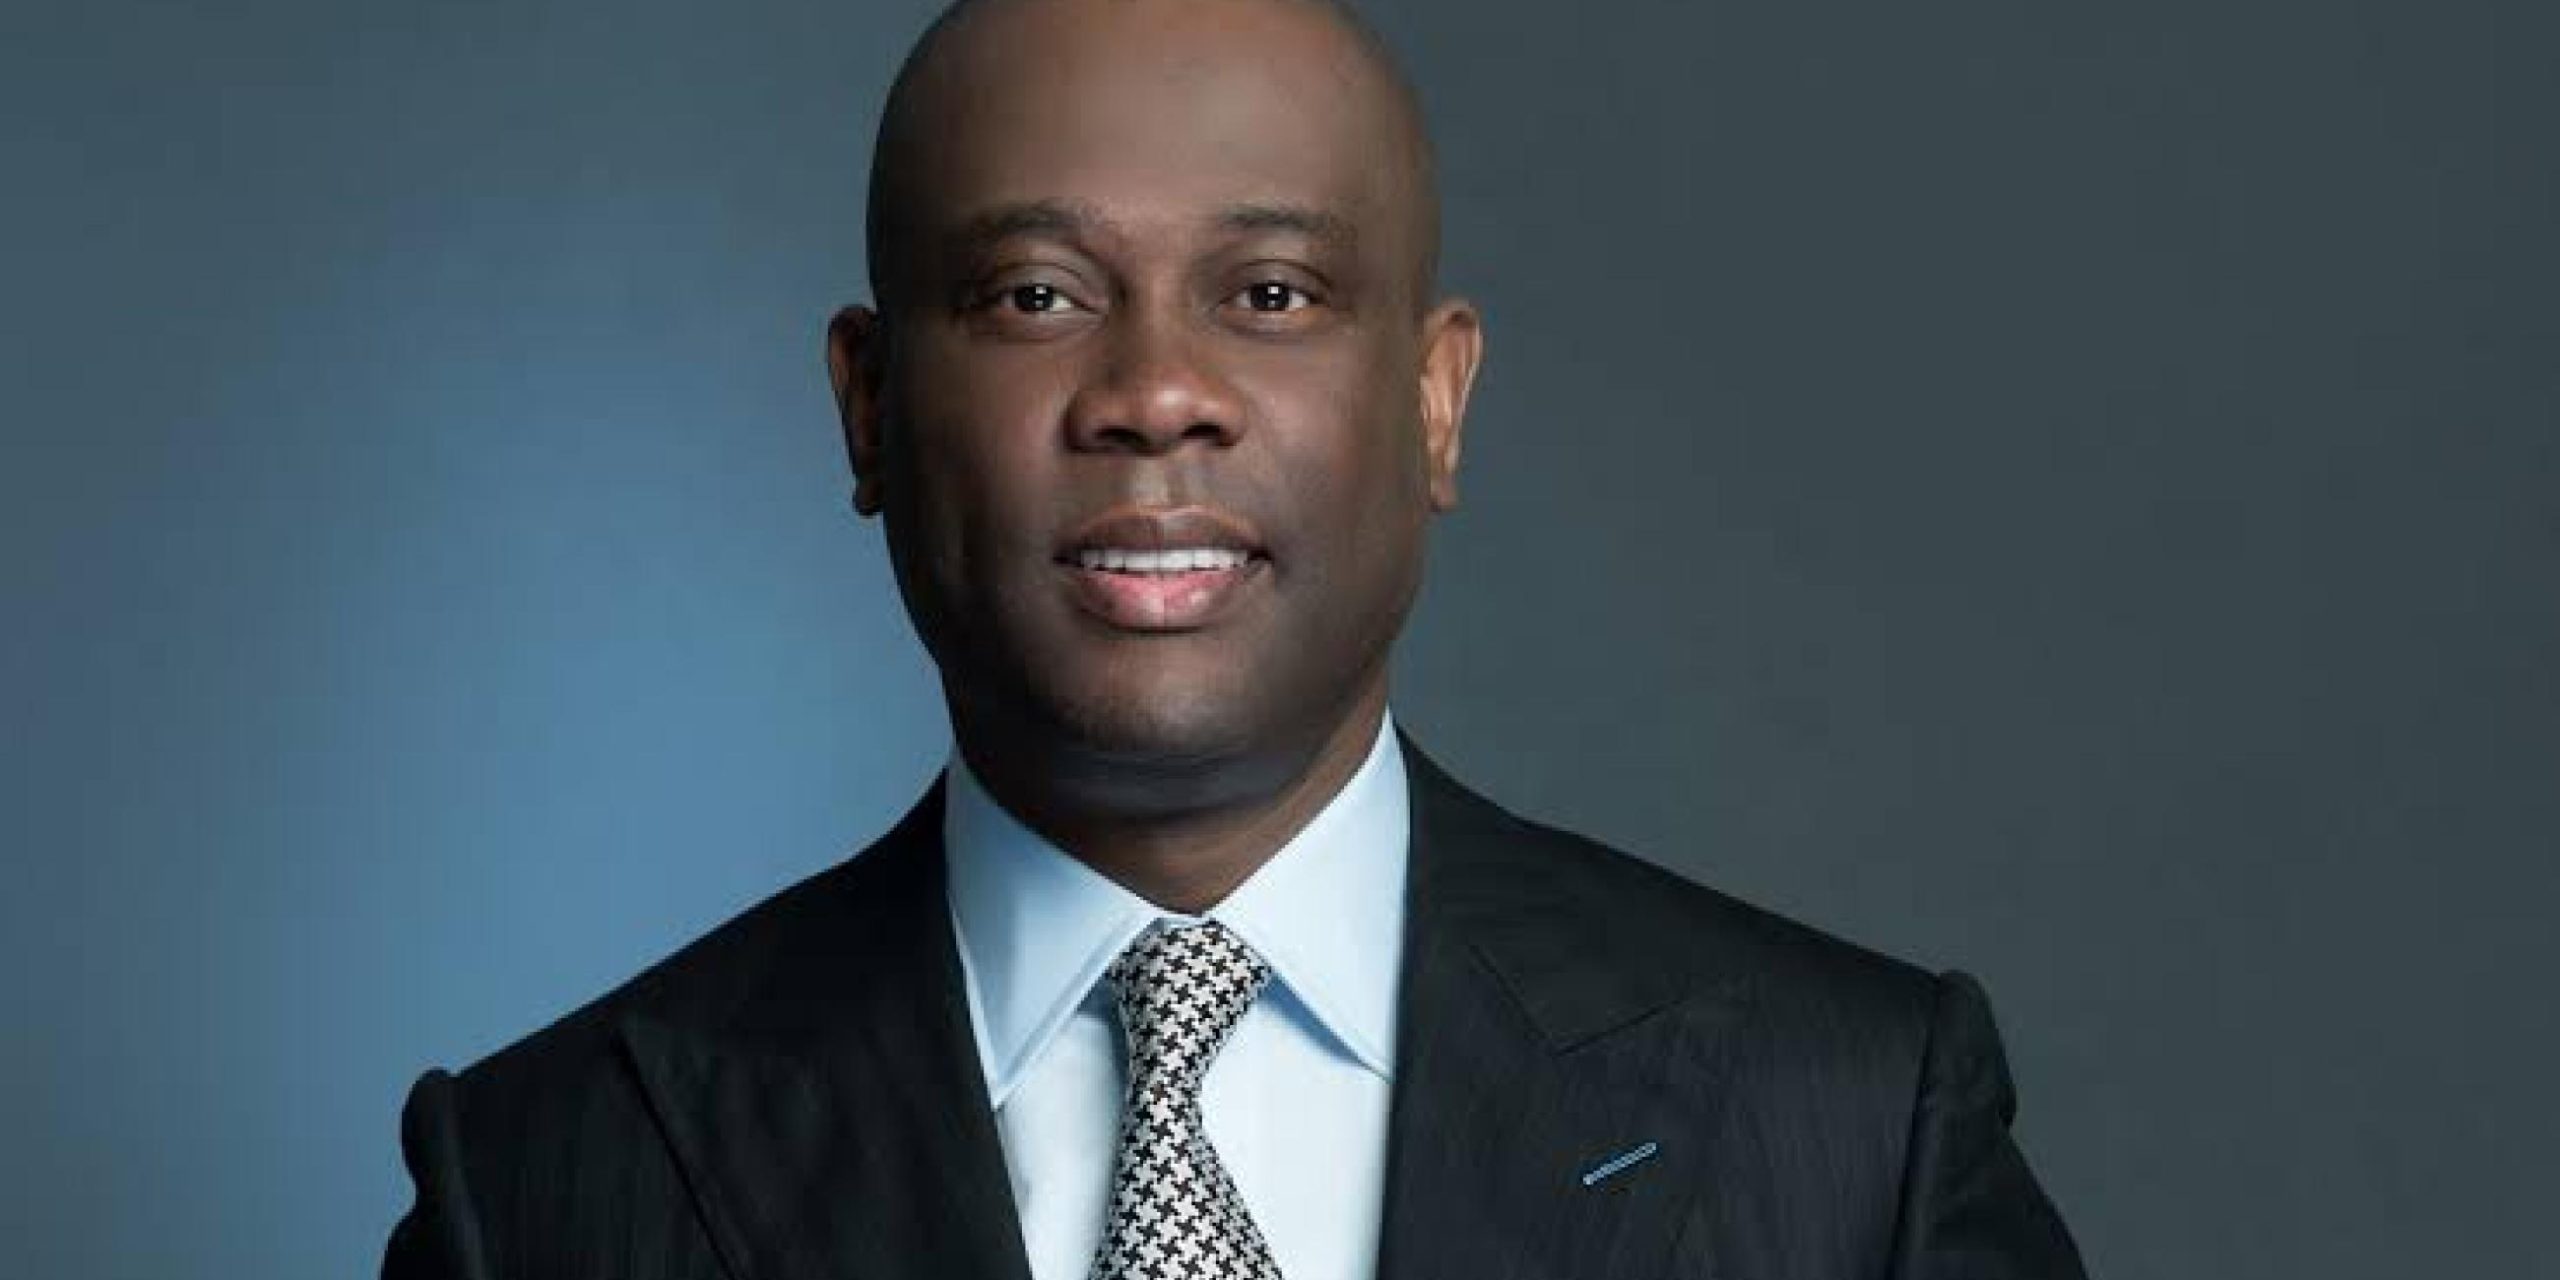 Access Bank CEO, Herbert Wigwe, Wife, Only Son Die in Helicopter Crash in USA